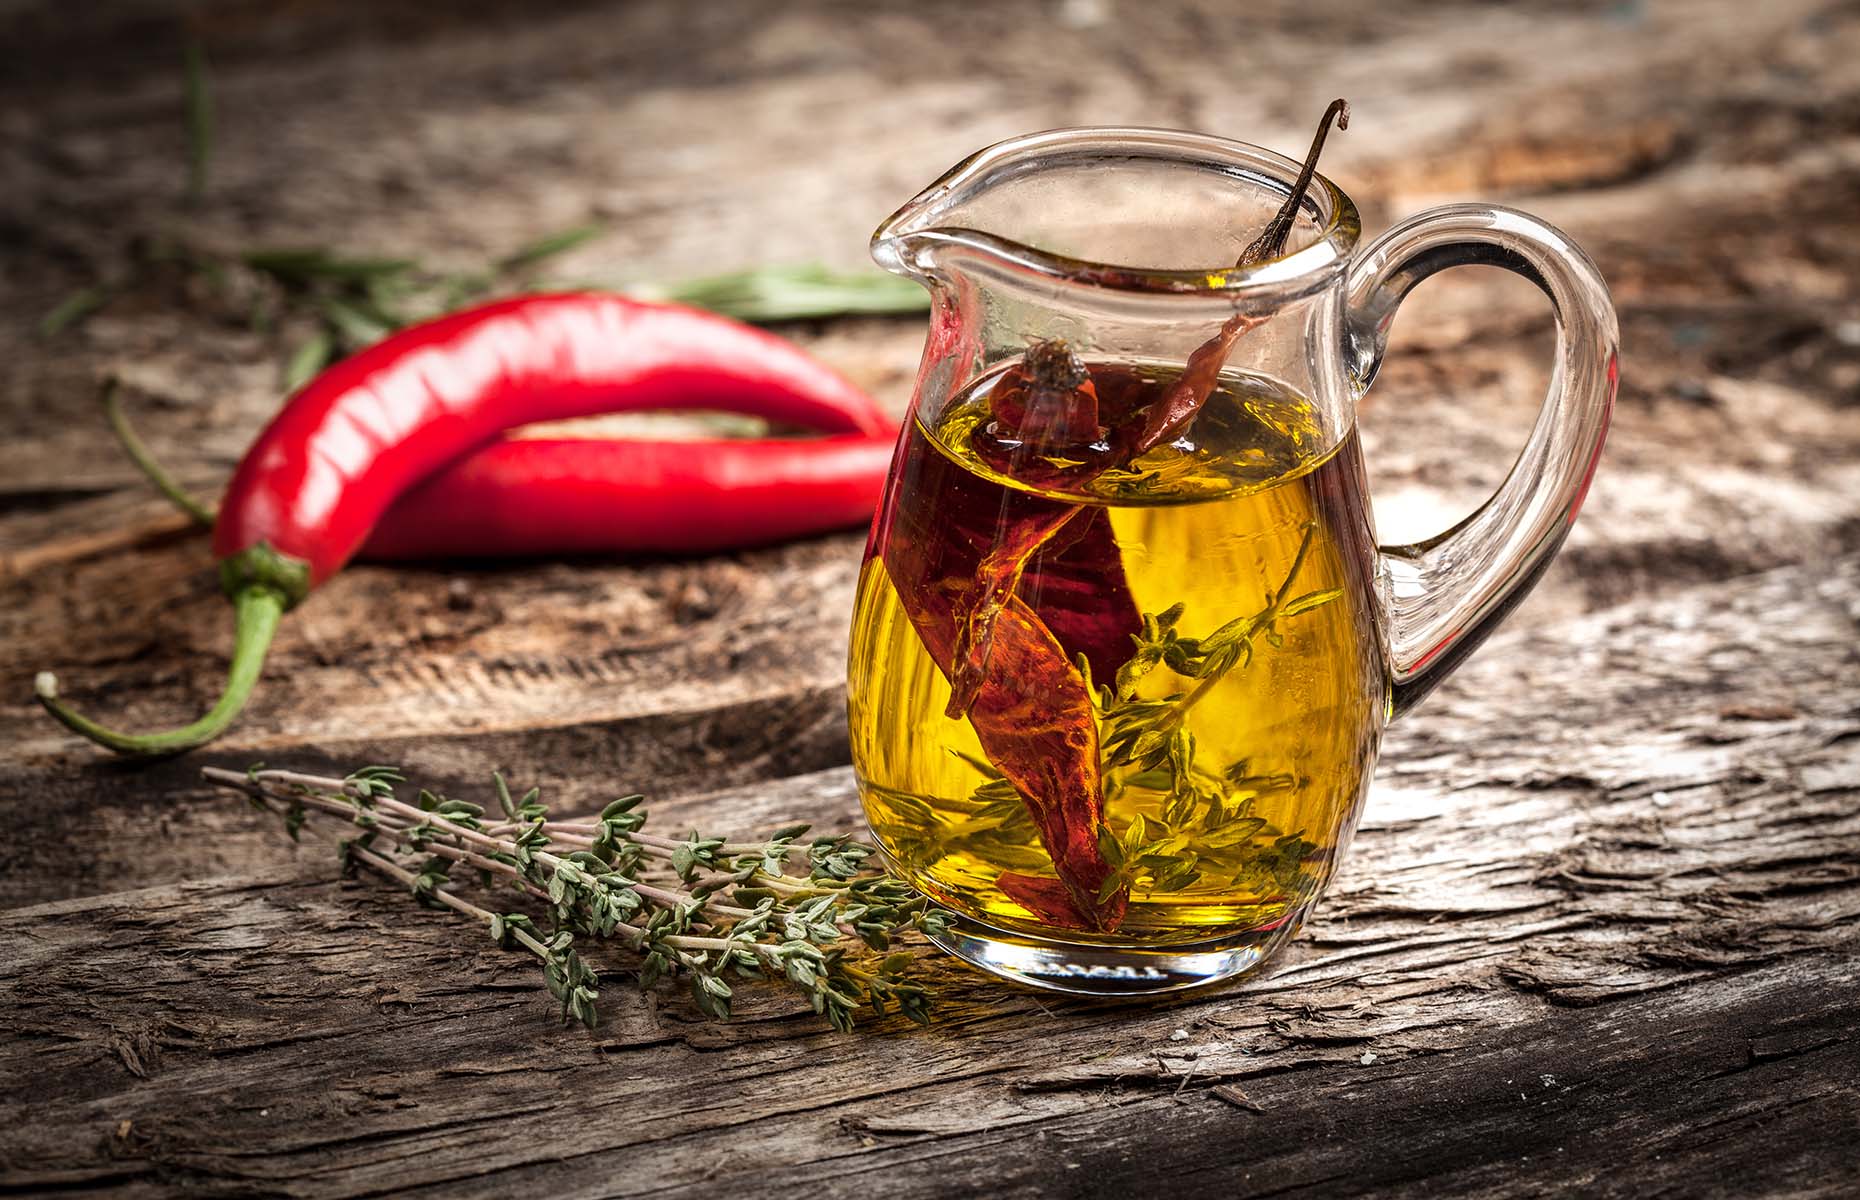 Dried chillies infusing olive oil (Image: Tim UR/Shutterstock)